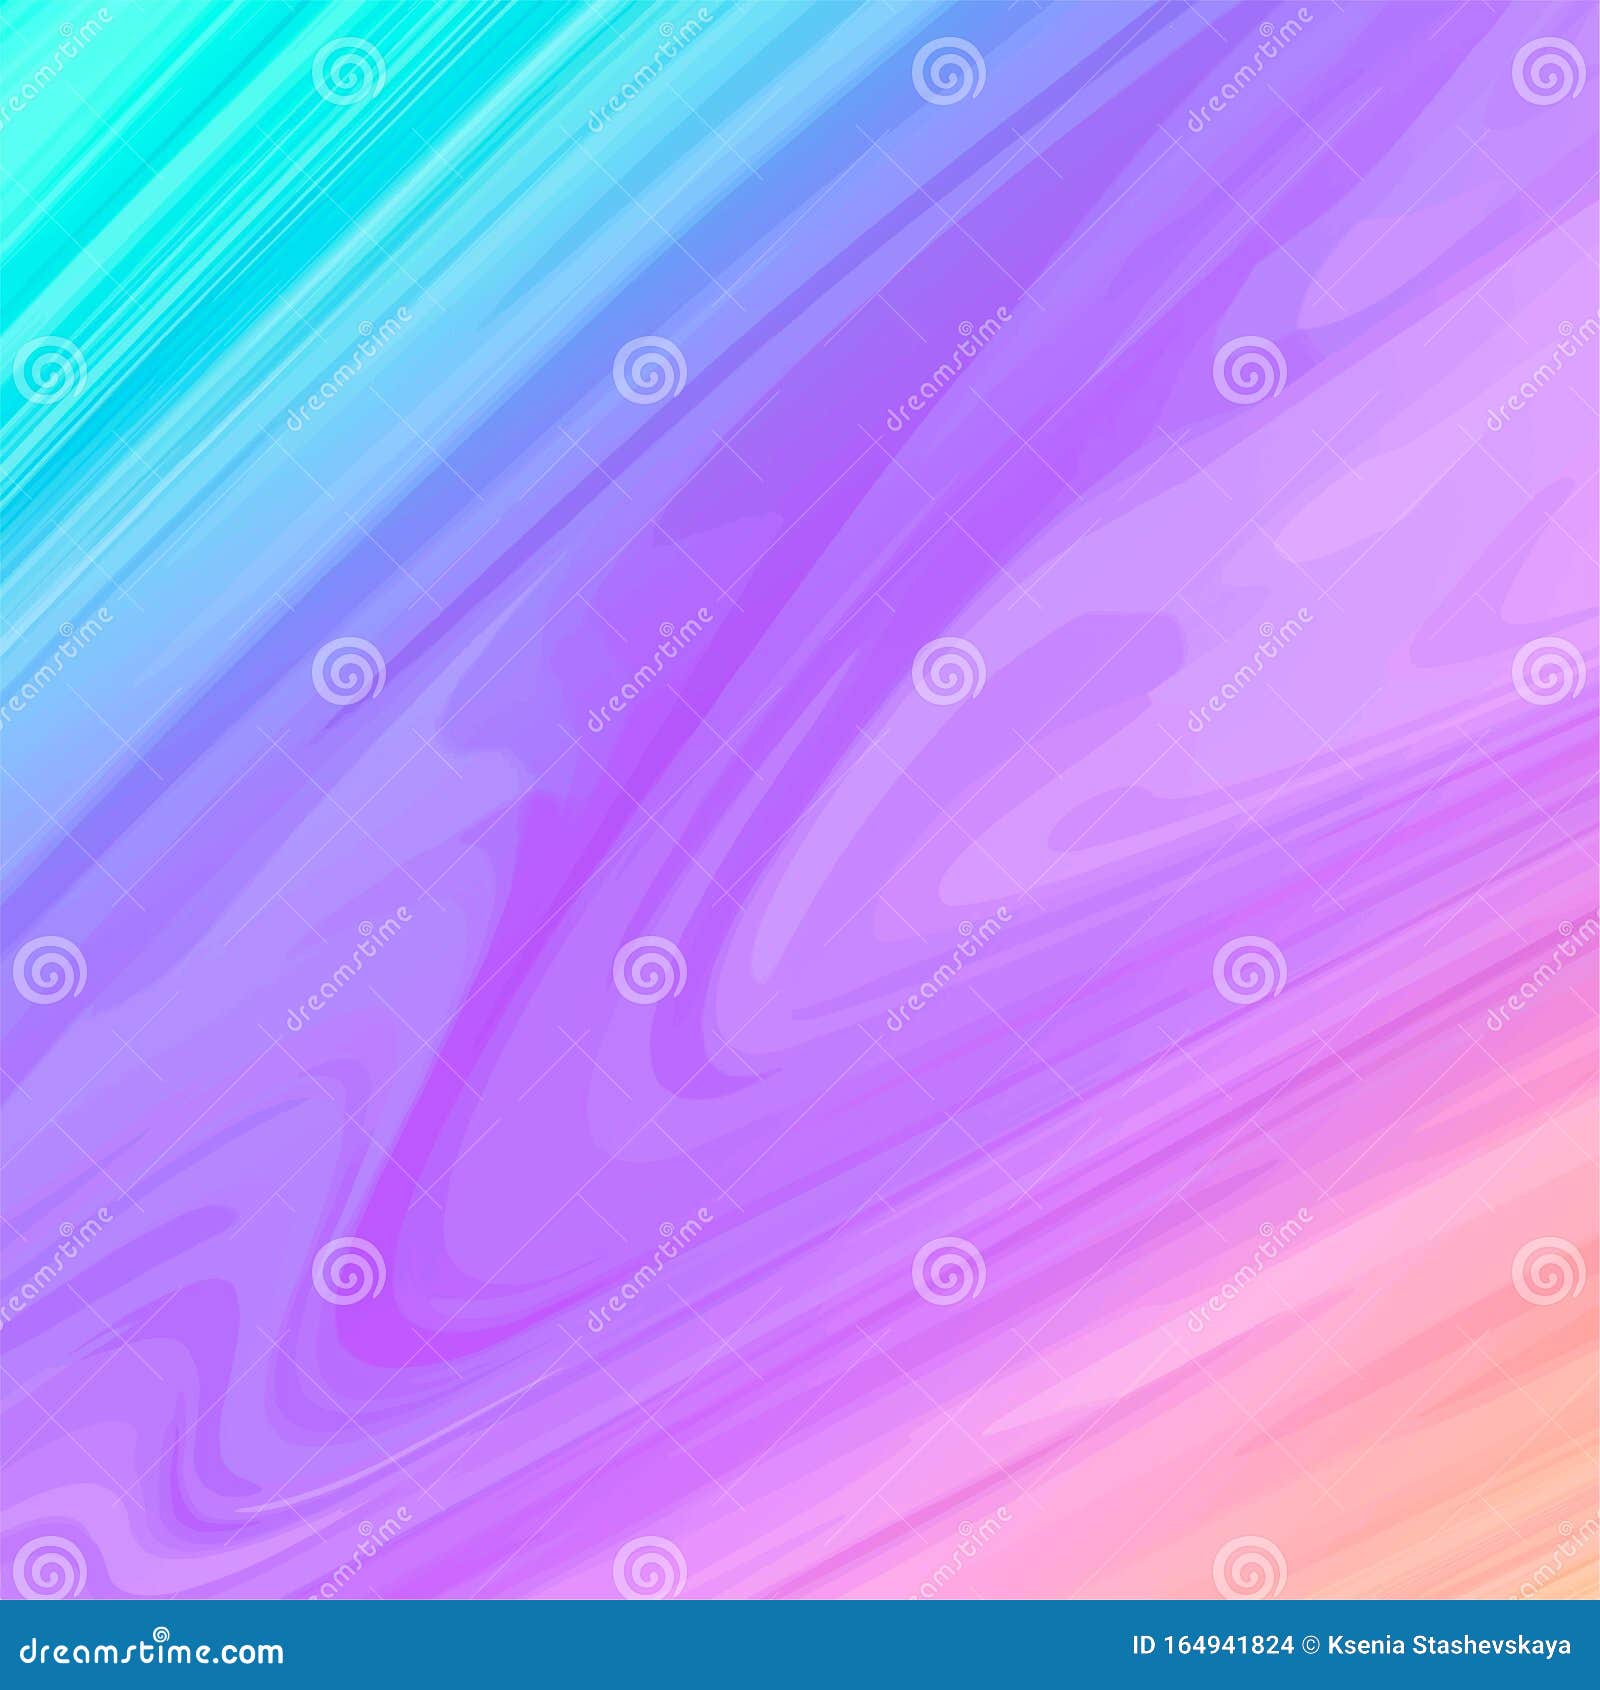 Abstract Pastel Galaxy Background Marble Texture Stock